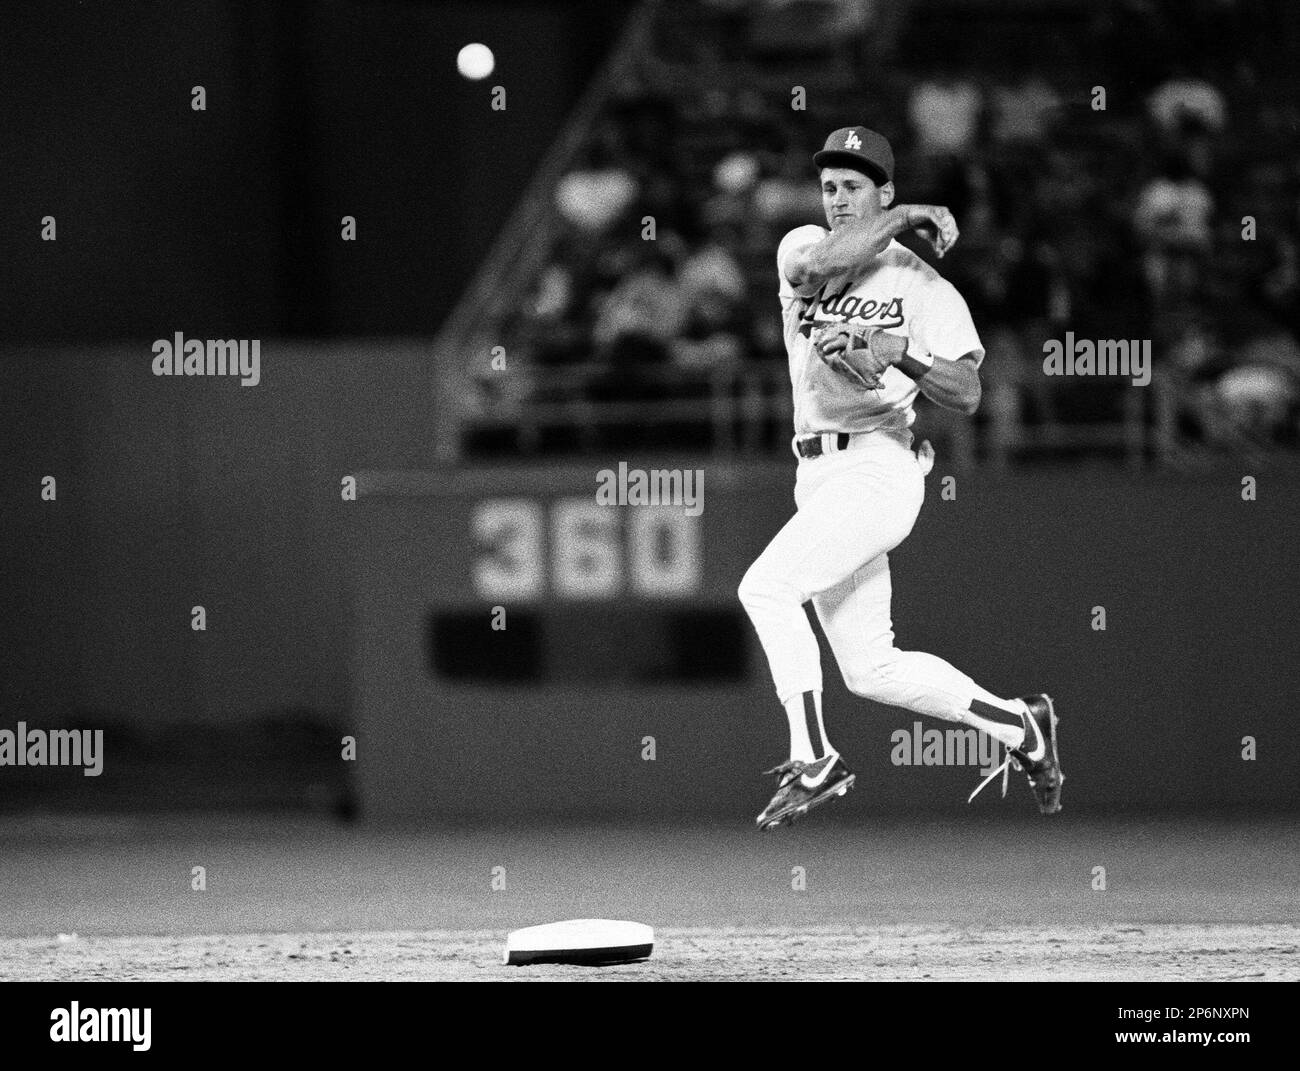 Steve Sax of the Los Angeles Dodgers relays a double play throw to